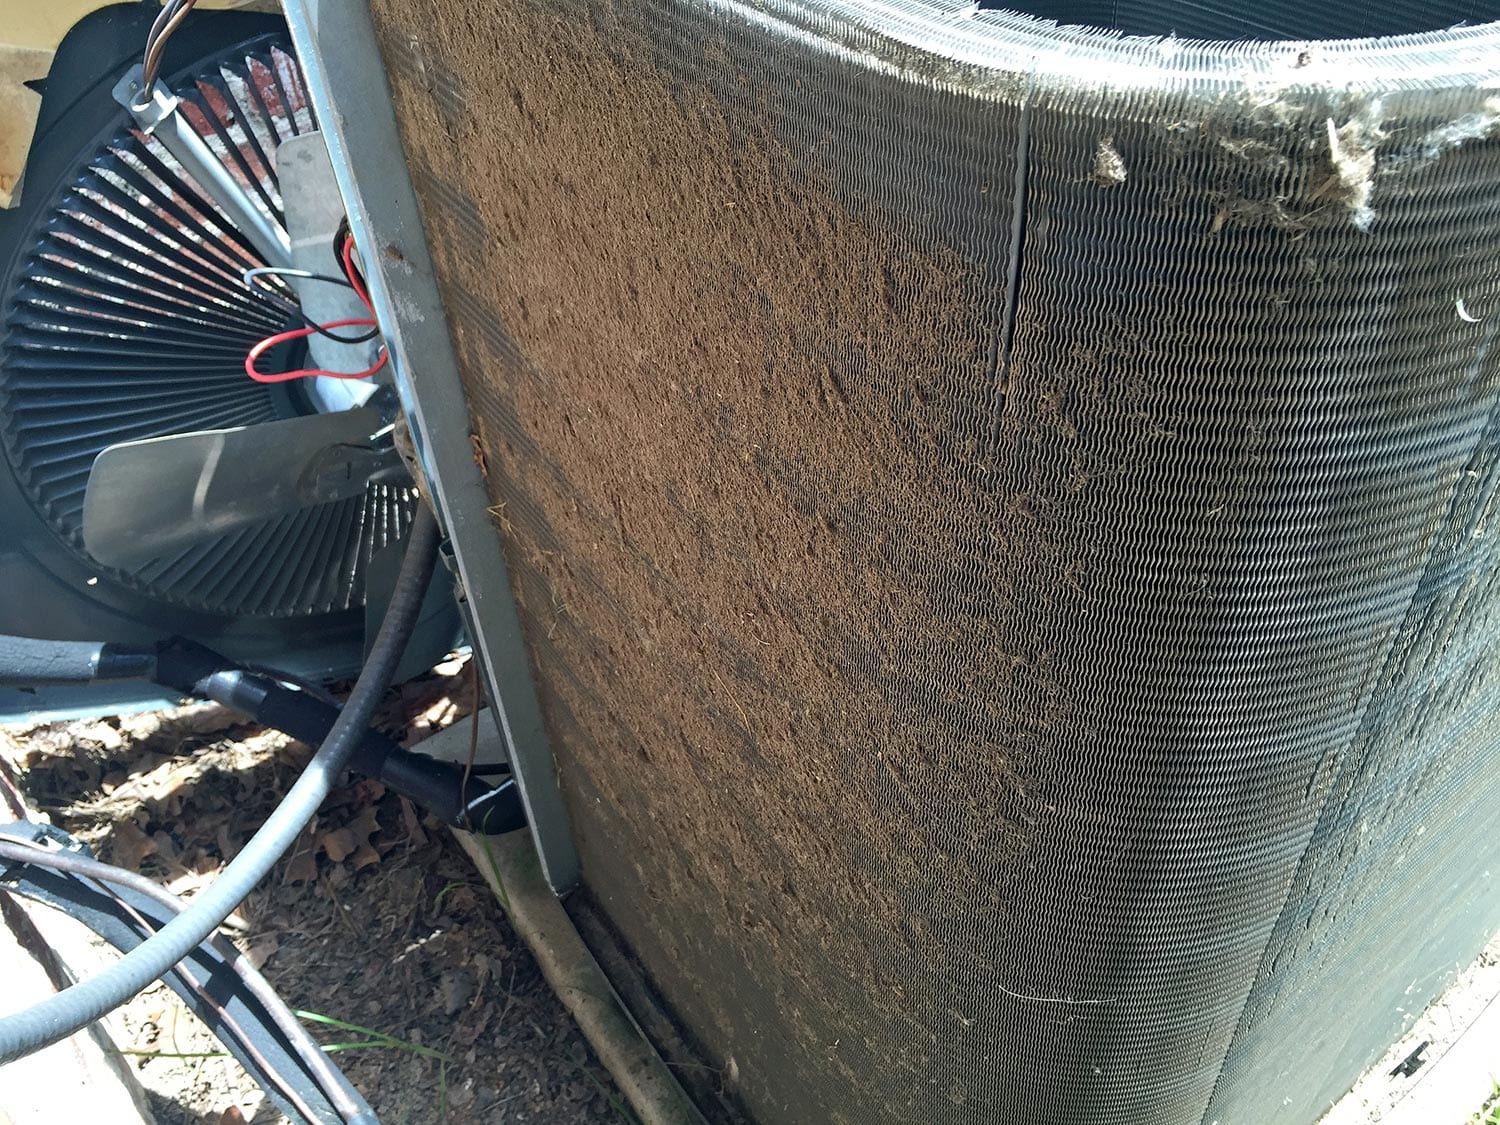 AIr Conditioner dirty condenser coil that needs cleaning